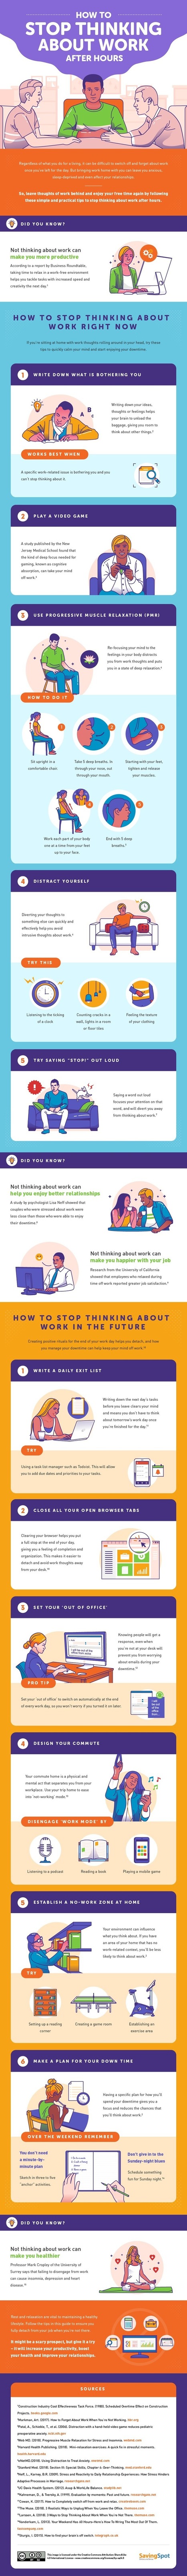 How to switch off your work brain after hours (infographic) via @digitaliworld | Moodle and Web 2.0 | Scoop.it